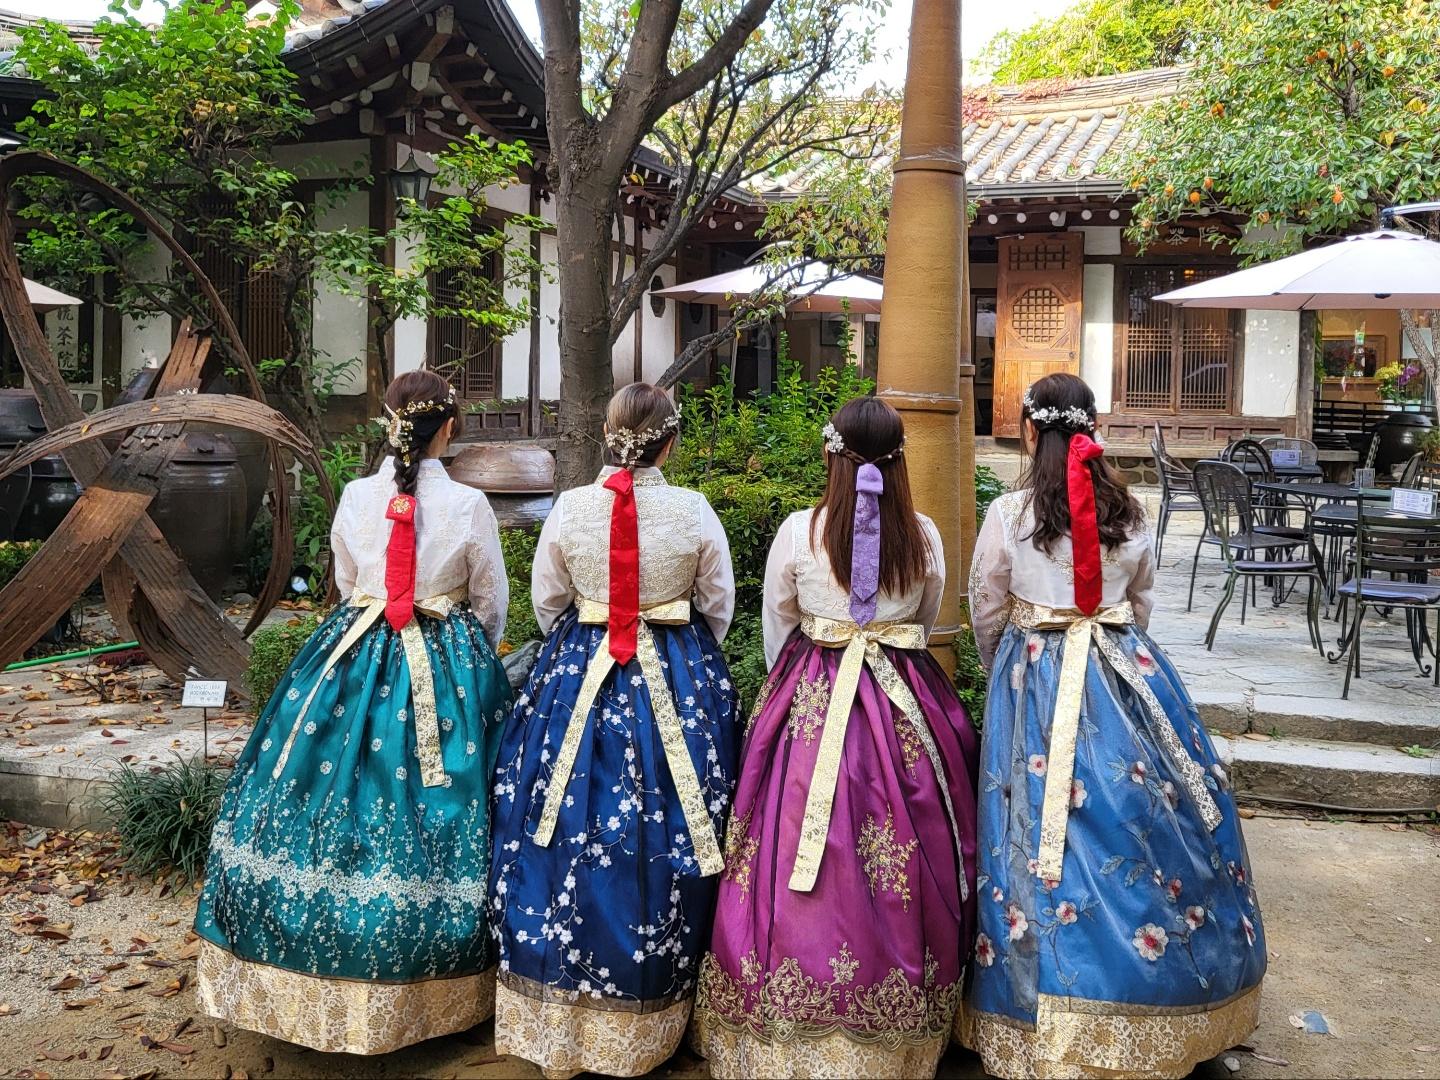 Girls having fun at Gyeongbokgung hanbok rental shop's outdoor area with plants, trees, umbrellas, tables, and entertainment.